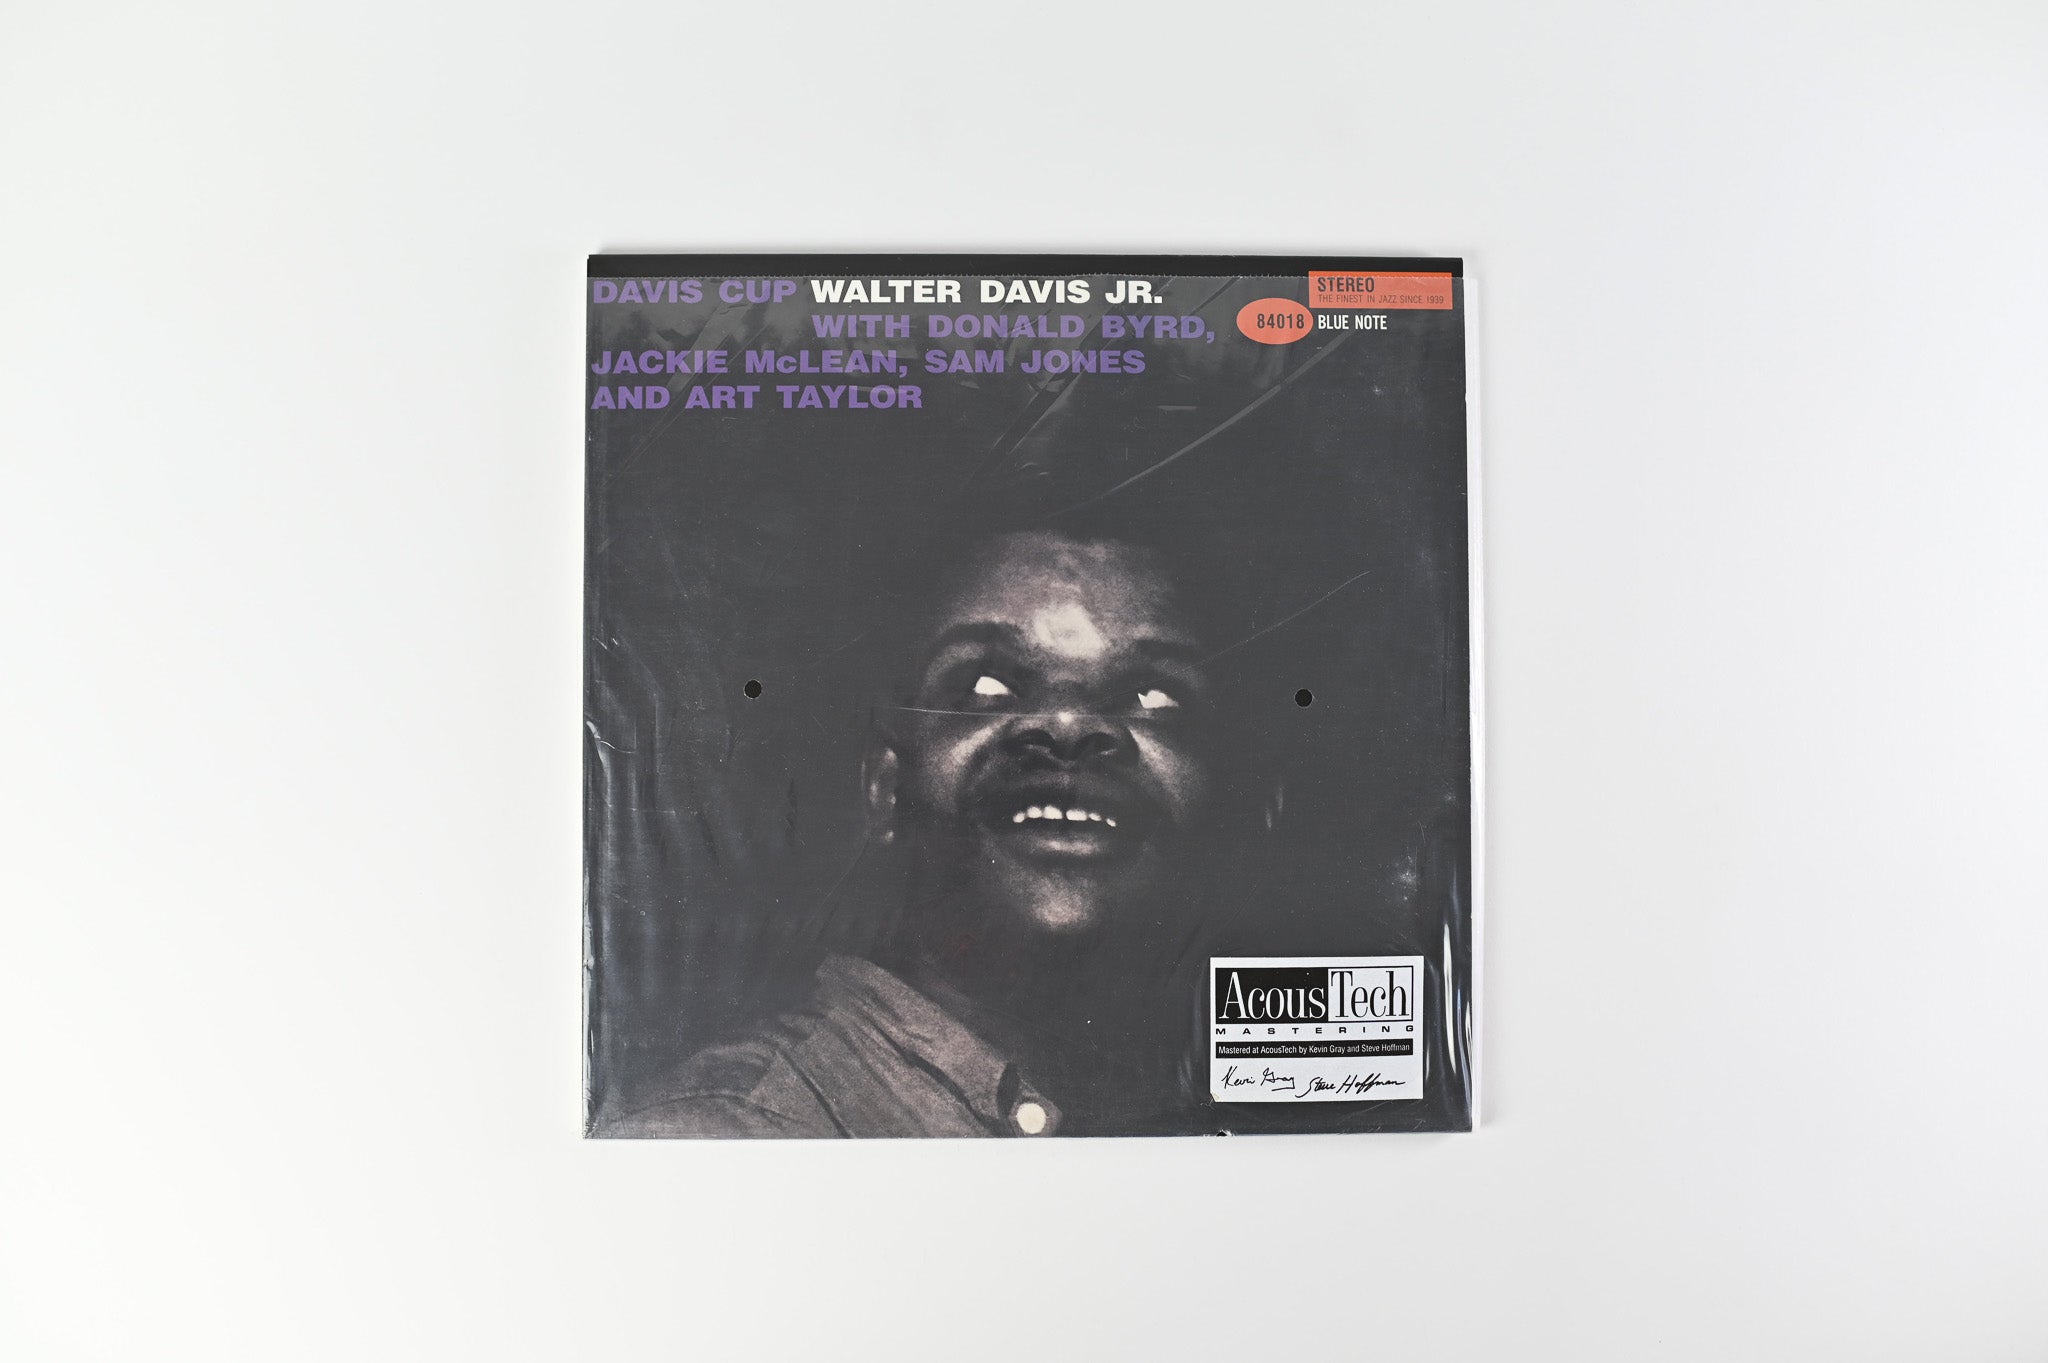 Walter Davis Jr. - Davis Cup on Blue Note Analogue Productions Ltd 45 RPM Numbered Reissue